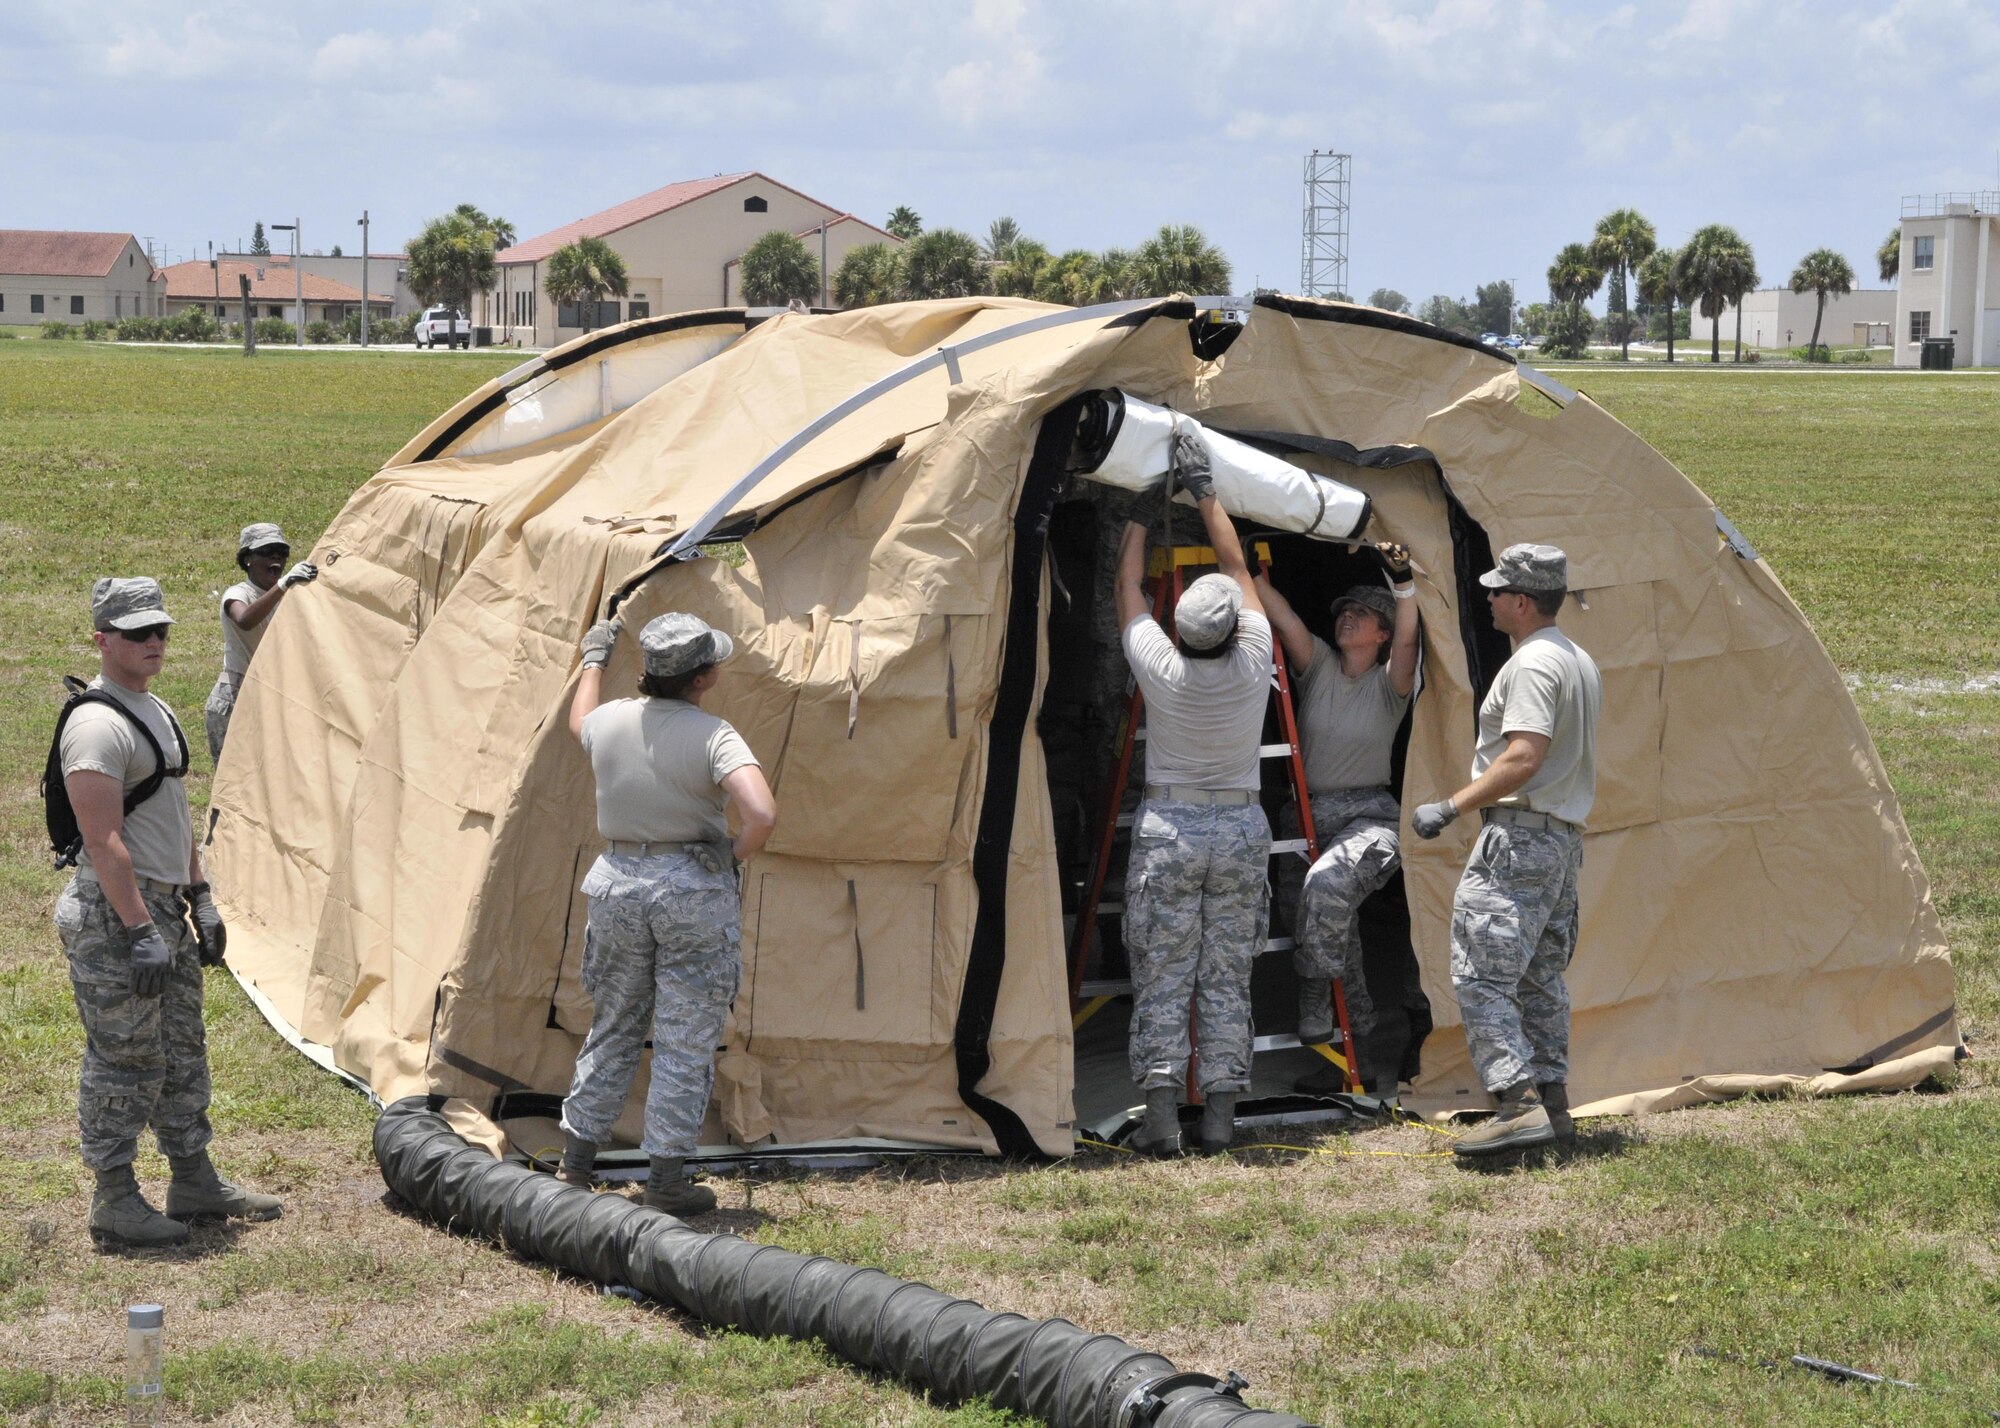 Reservists assigned to the 920th Rescue Wing Aeromedical Staging Squadron, assemble a tent to create a staging facility during MEDBEACH 2015 joint service exercise at Patrick Air Force Base, Fla., July 11, 2015. MEDBEACH 2015 is a joint-service exercise in conjunction with the Army, Navy and Nation Guard and provides realistic training while saving tax payer more than $1 million. . (U.S. Air Force photo by Tech. Sgt. Michael Means)